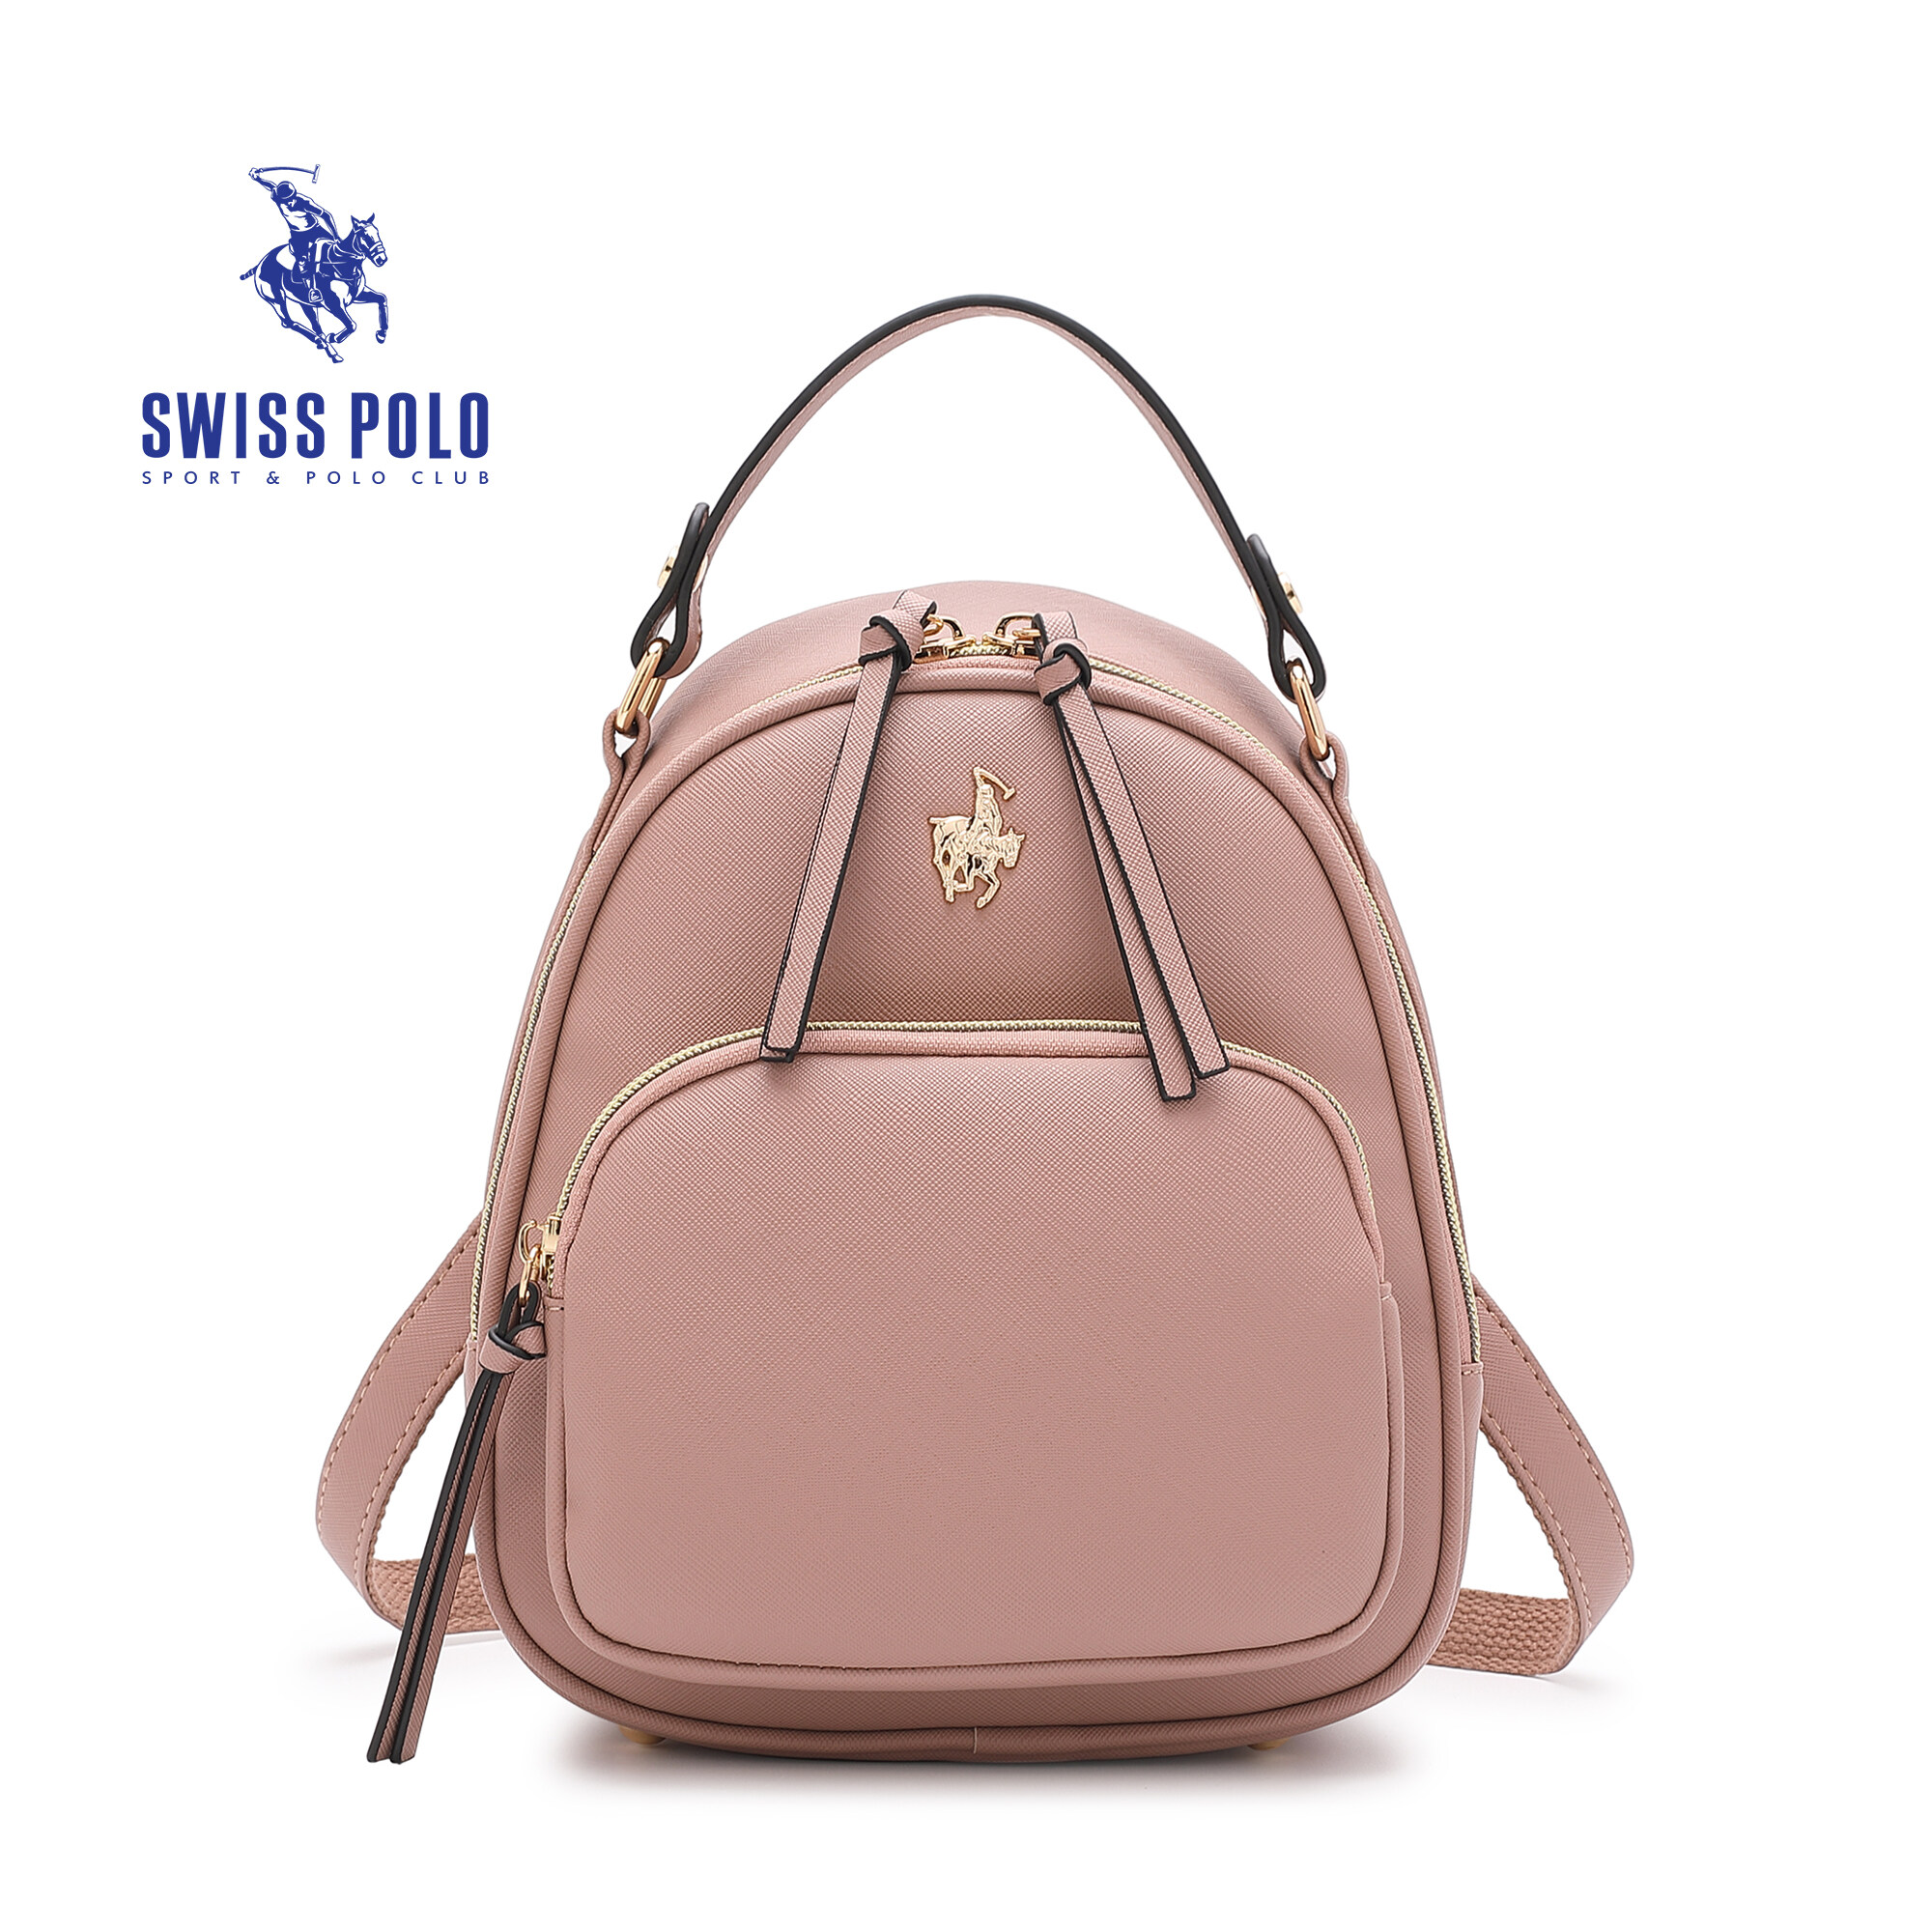 SWISS POLO Ladies Mini Backpack HGZ 7850-4 PINK